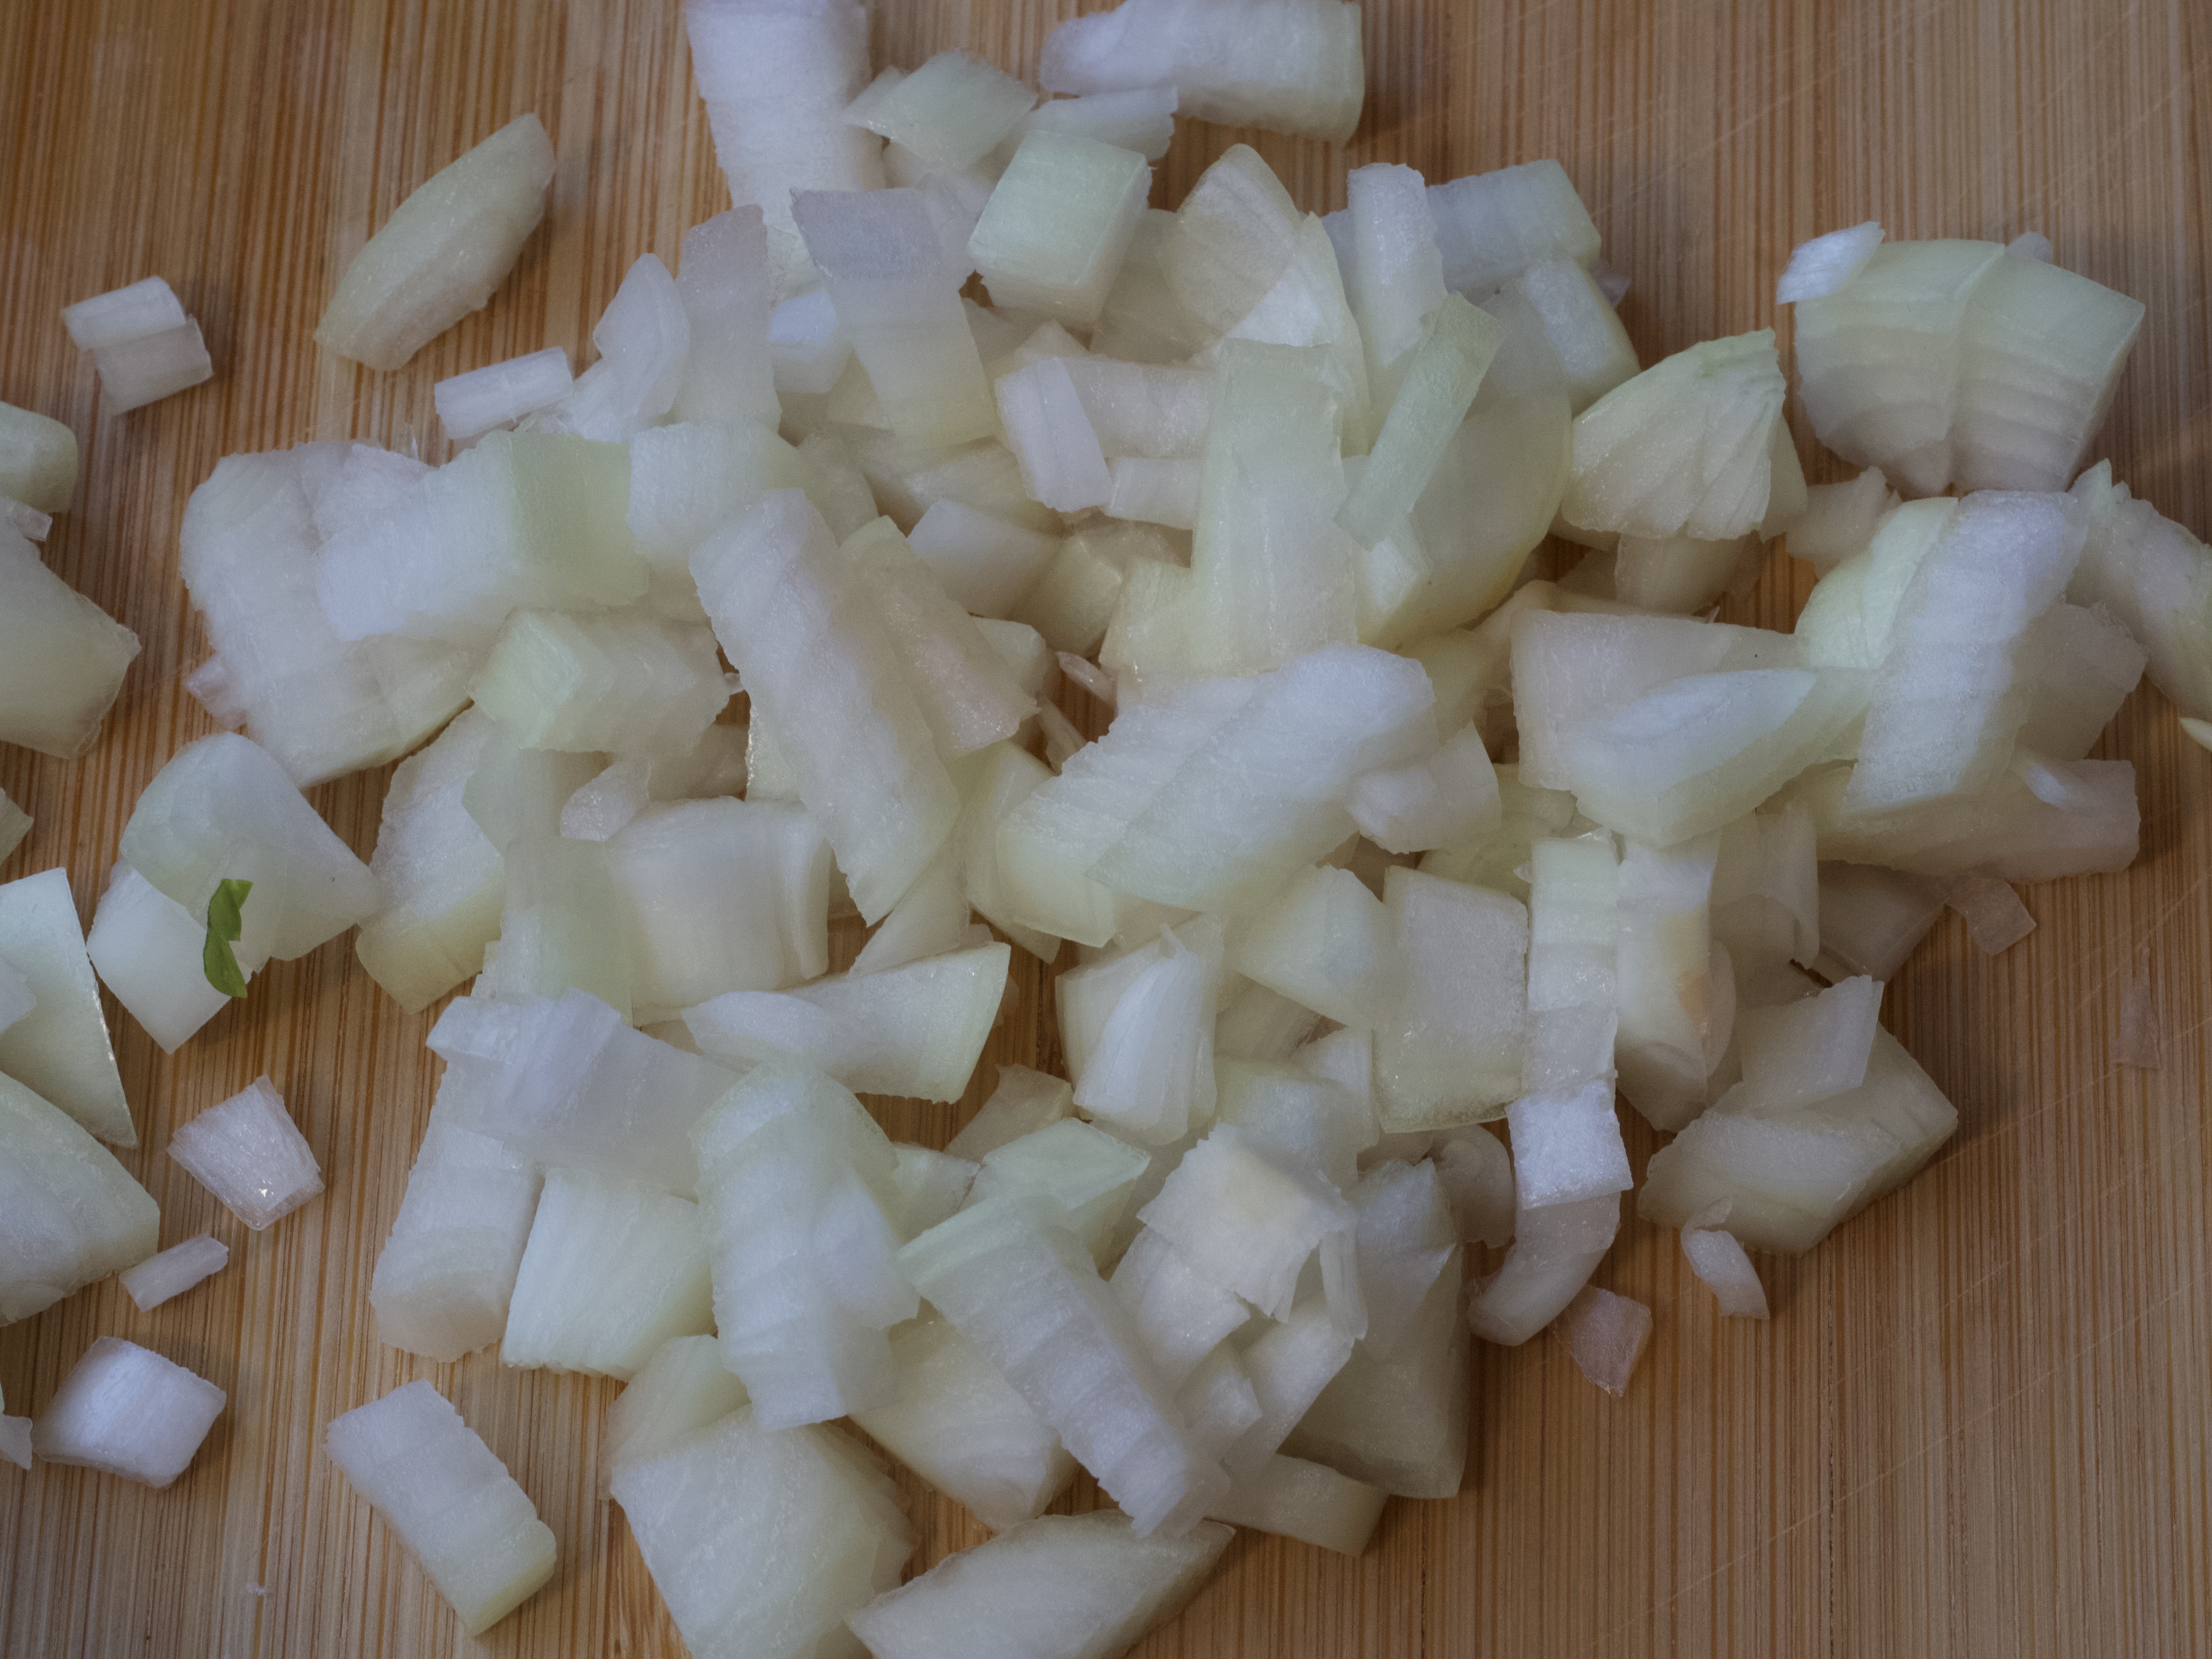 Diced Cooking onions on the chopping board